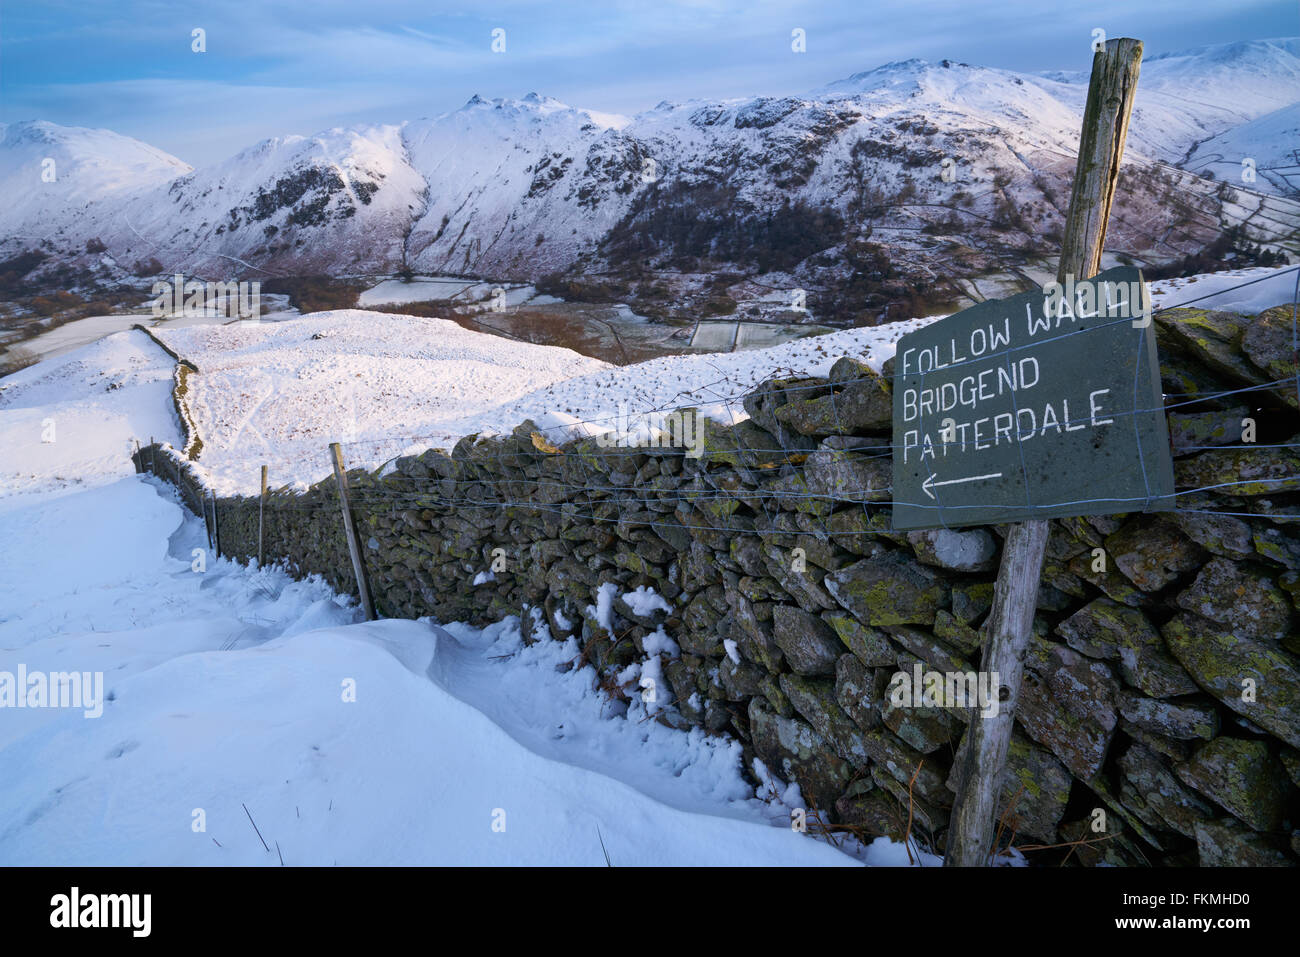 Signpost by a stone wall pointing towards Bridgend, Patterdale in the English Lake District. Stock Photo